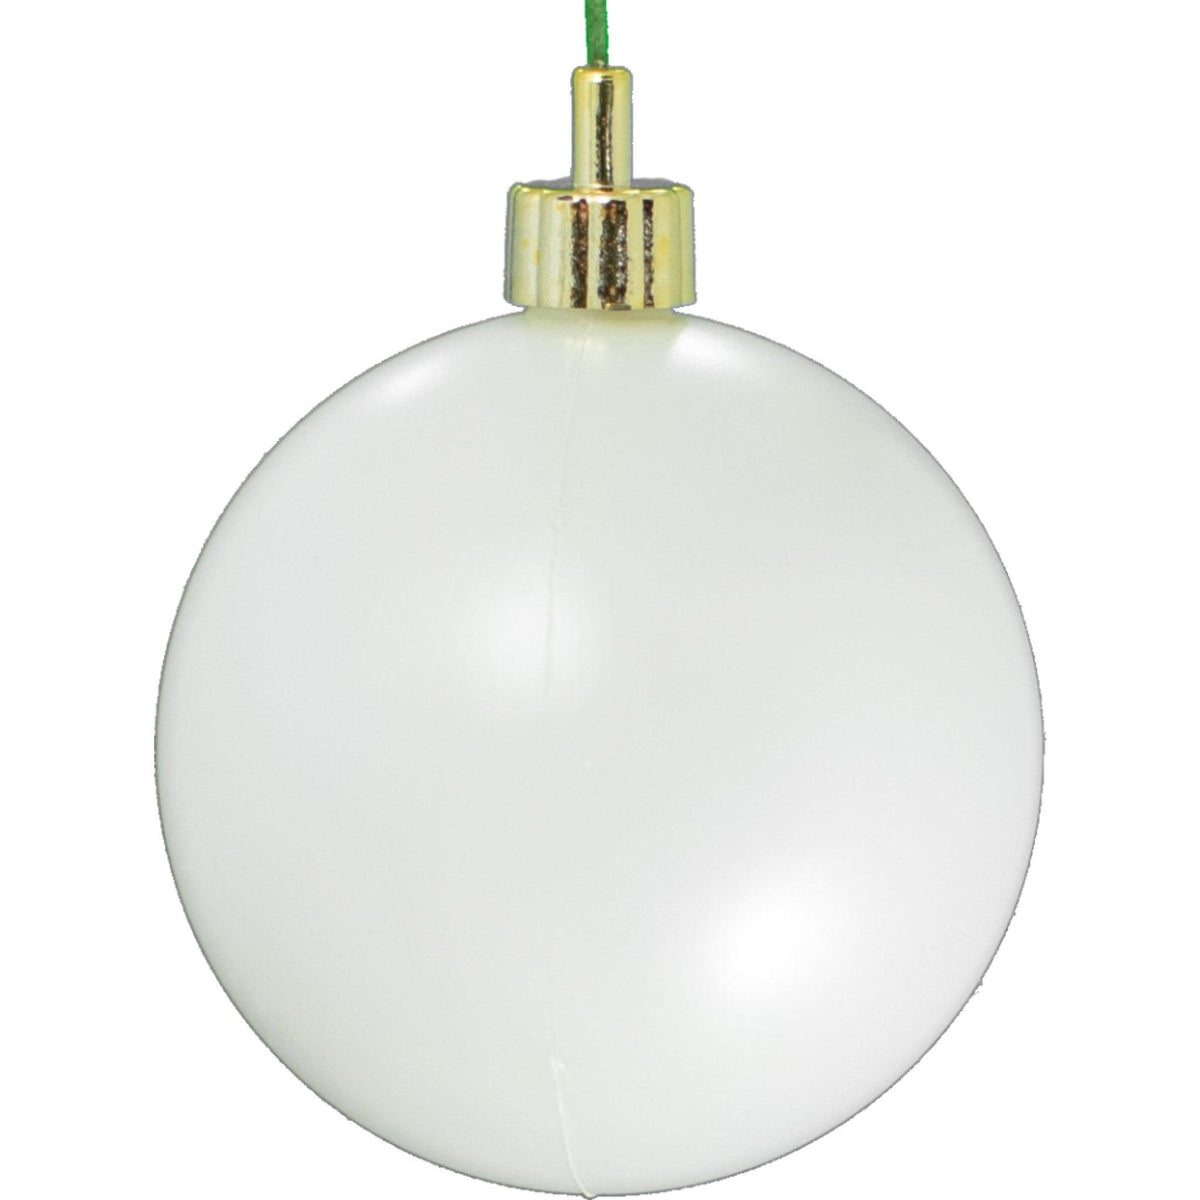 Lee Display offers brand new Shiny Matte White Plastic Ball Ornaments at wholesale prices for affordable Christmas Tree Hanging and Holiday Decorating on sale at leedisplay.com